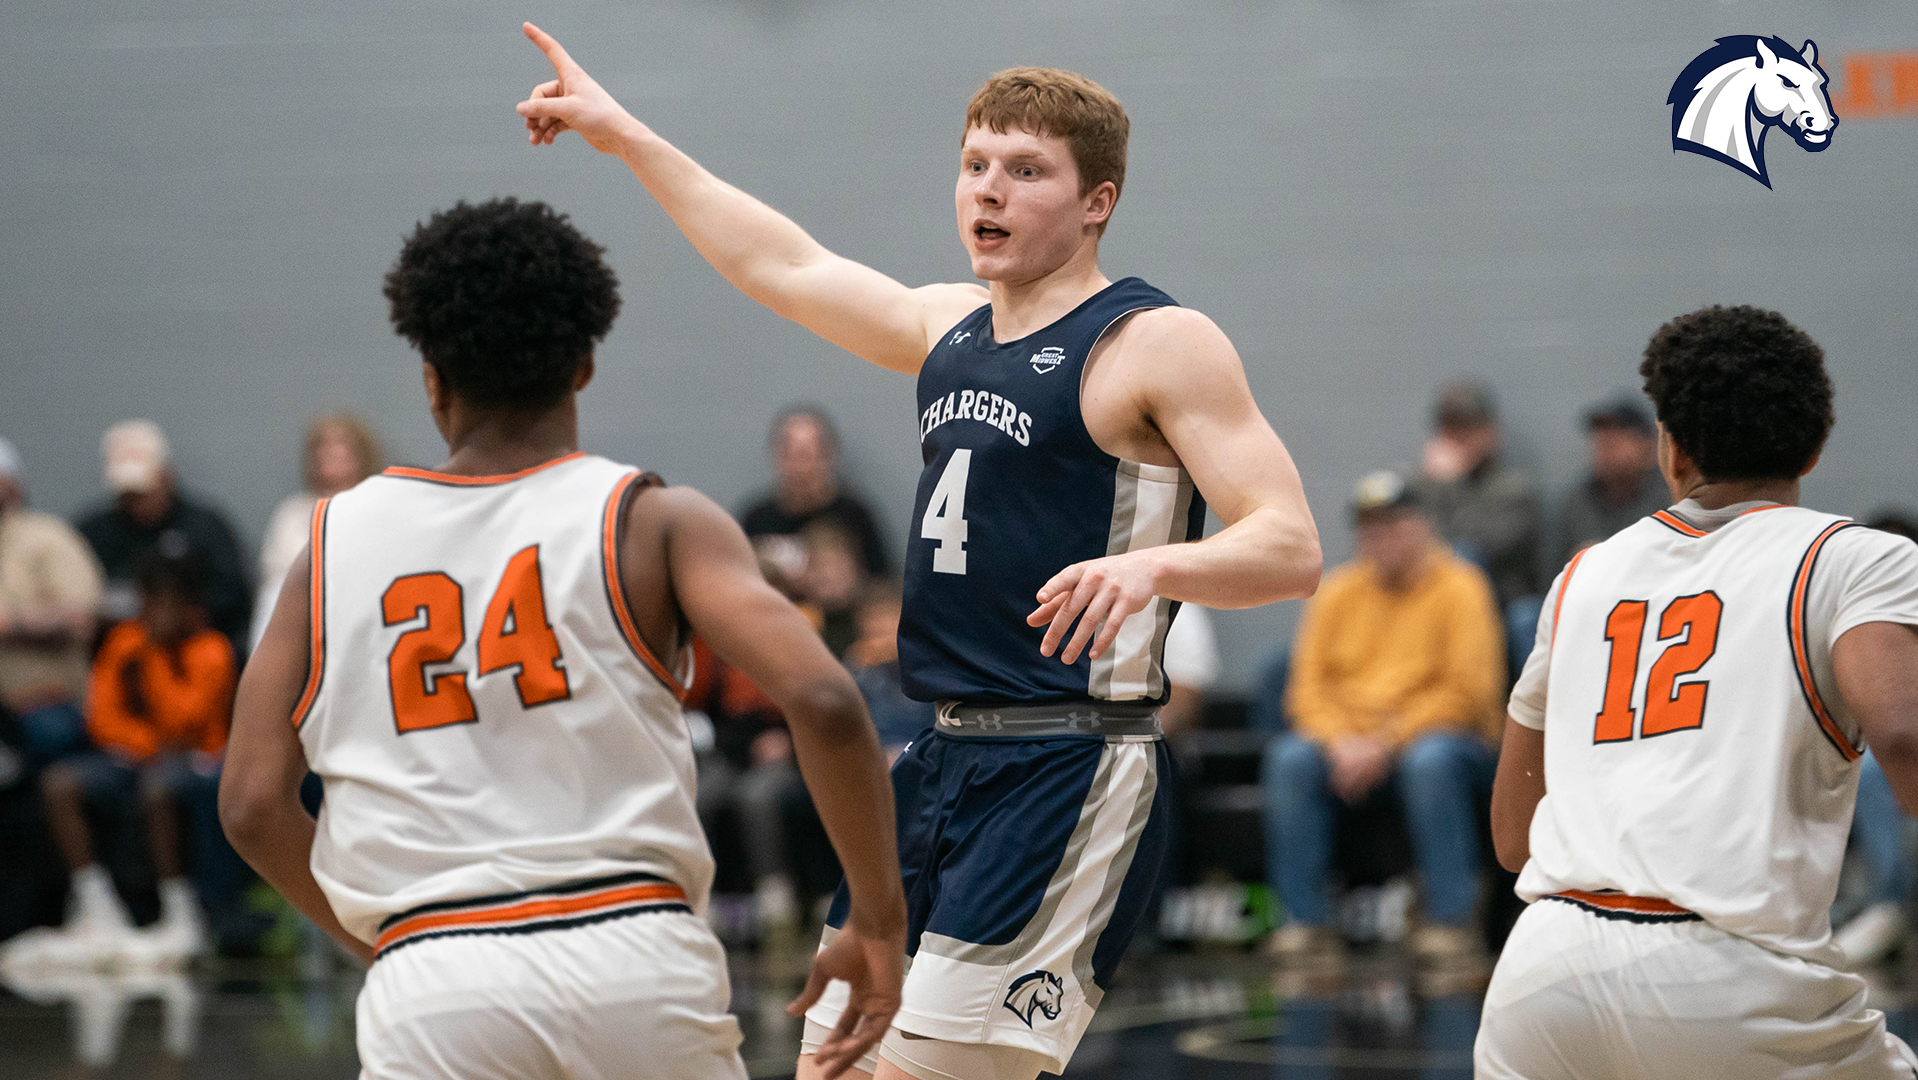 Chargers undone by late rally in 73-69 road loss at Findlay